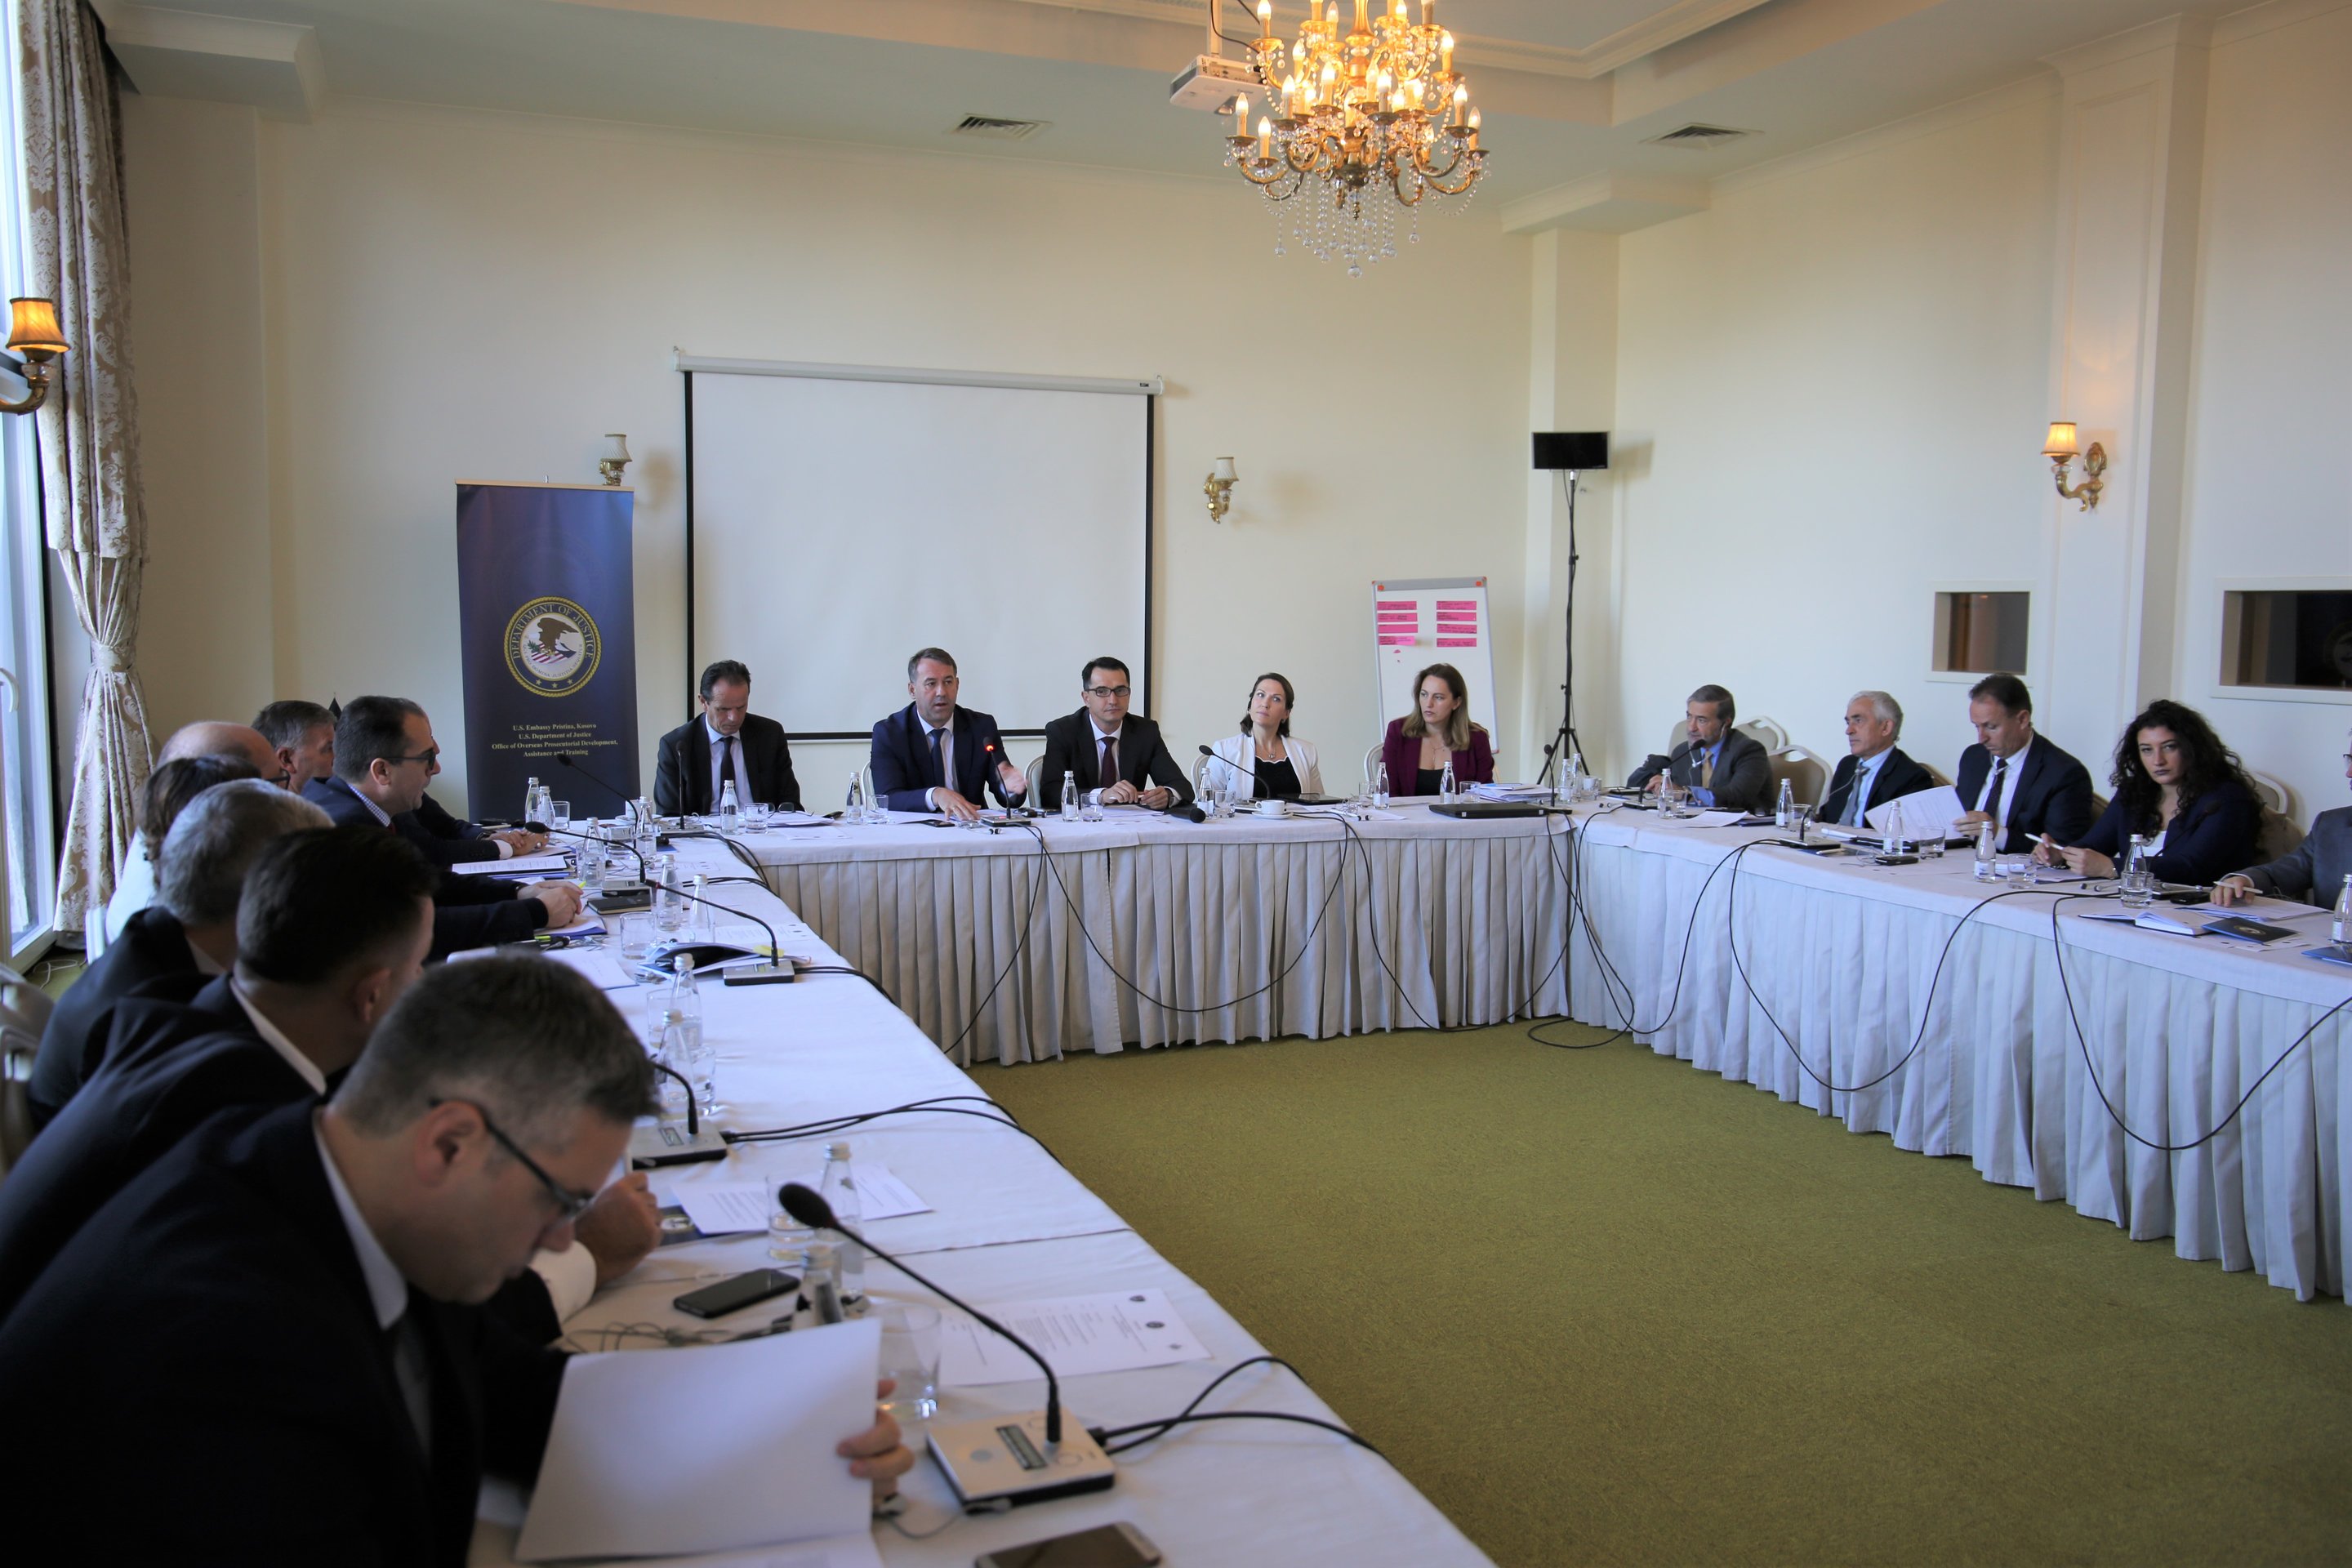 Workshop on implementation of the Law on Disciplinary Responsibility of Judges and Prosecutors is held